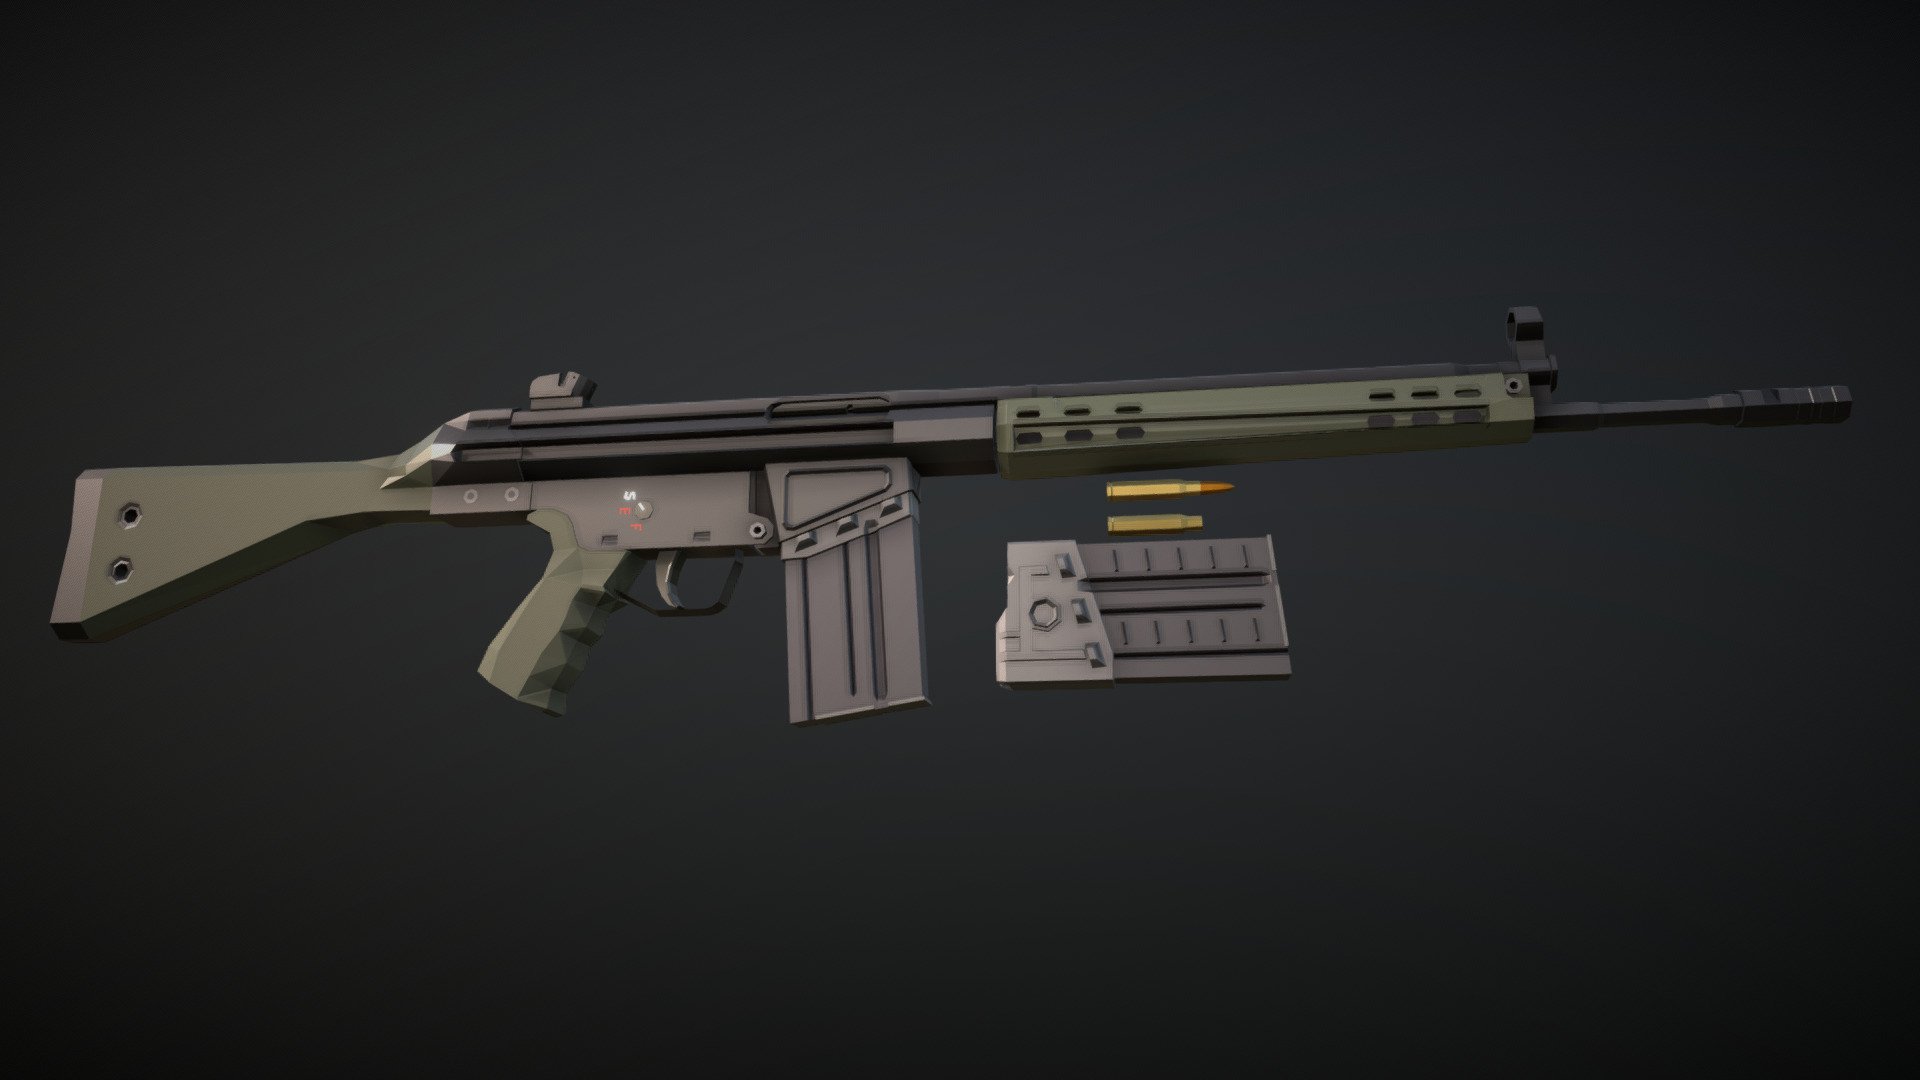 low-poly model of the G3 rifle made by Heckler&amp;Koch and adopted by the german military as a service rifle during the cold war.

update: removed some unnecessary geometry, converted all quads into tris. I will soon do this with all of my other models too 3d model